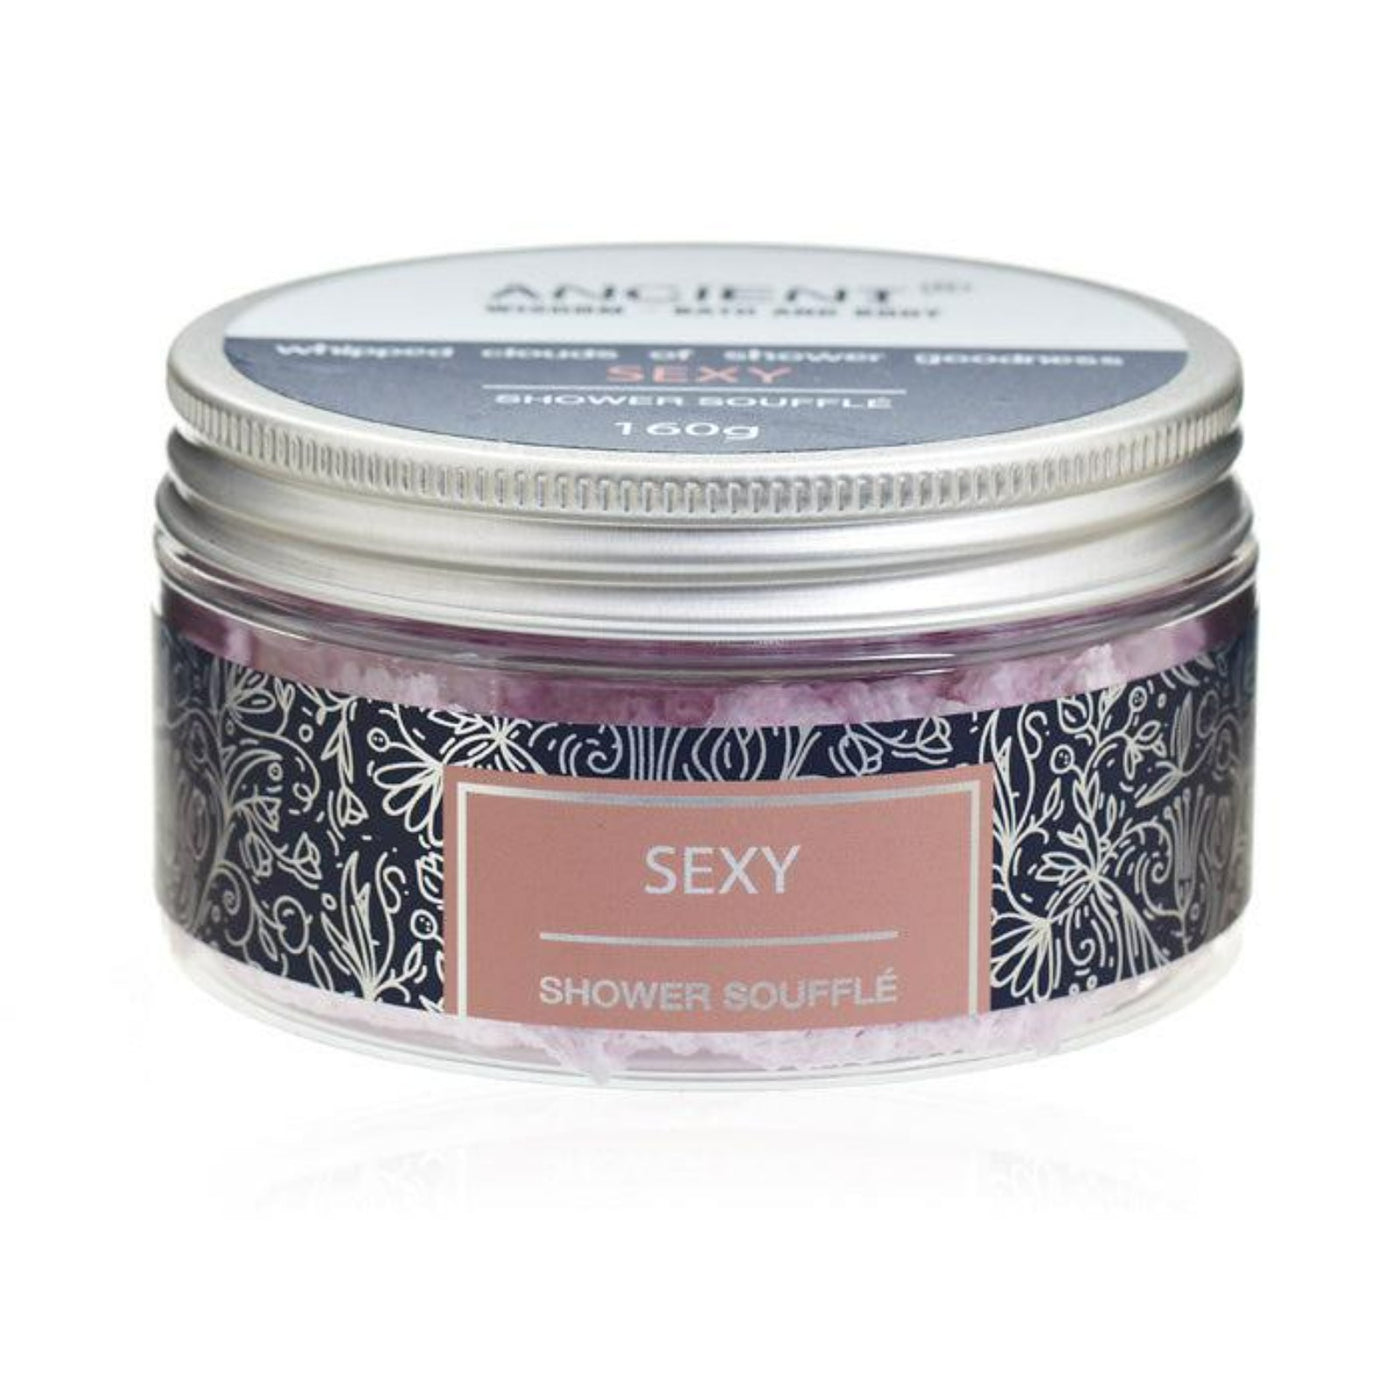 Body Cleansing Shower Souffle 160g - Sexy.